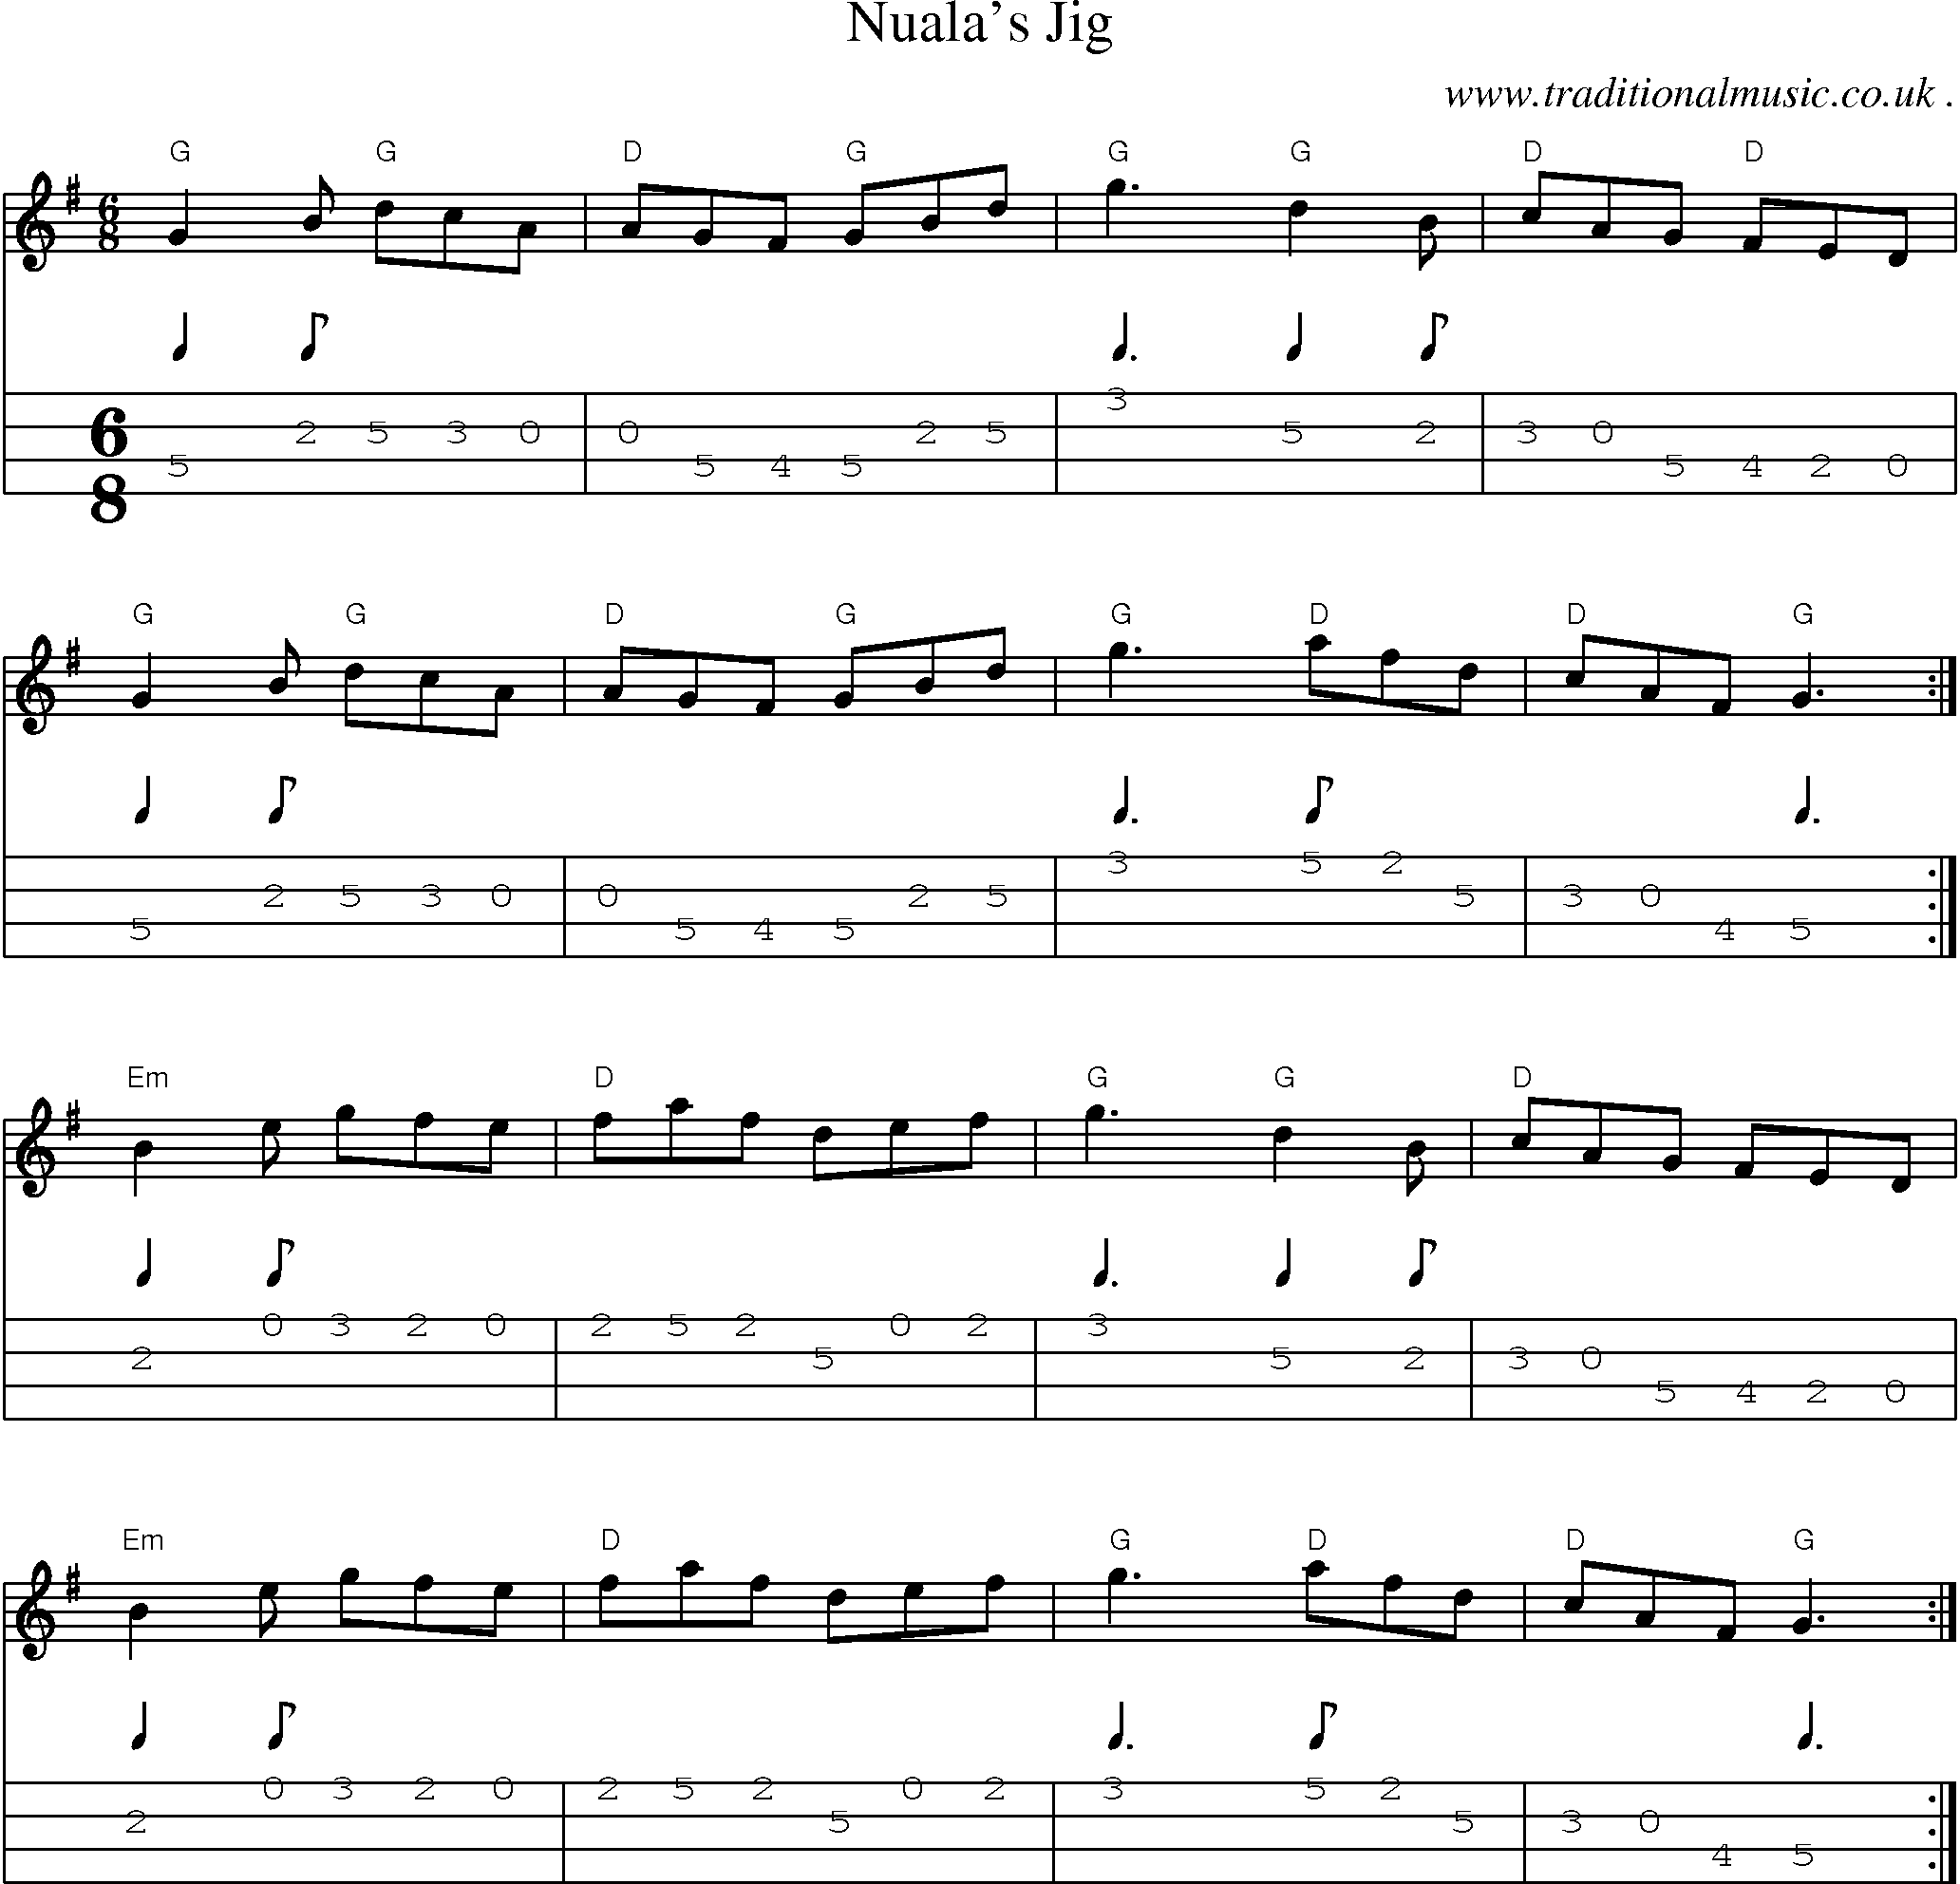 Sheet-music  score, Chords and Mandolin Tabs for Nualas Jig